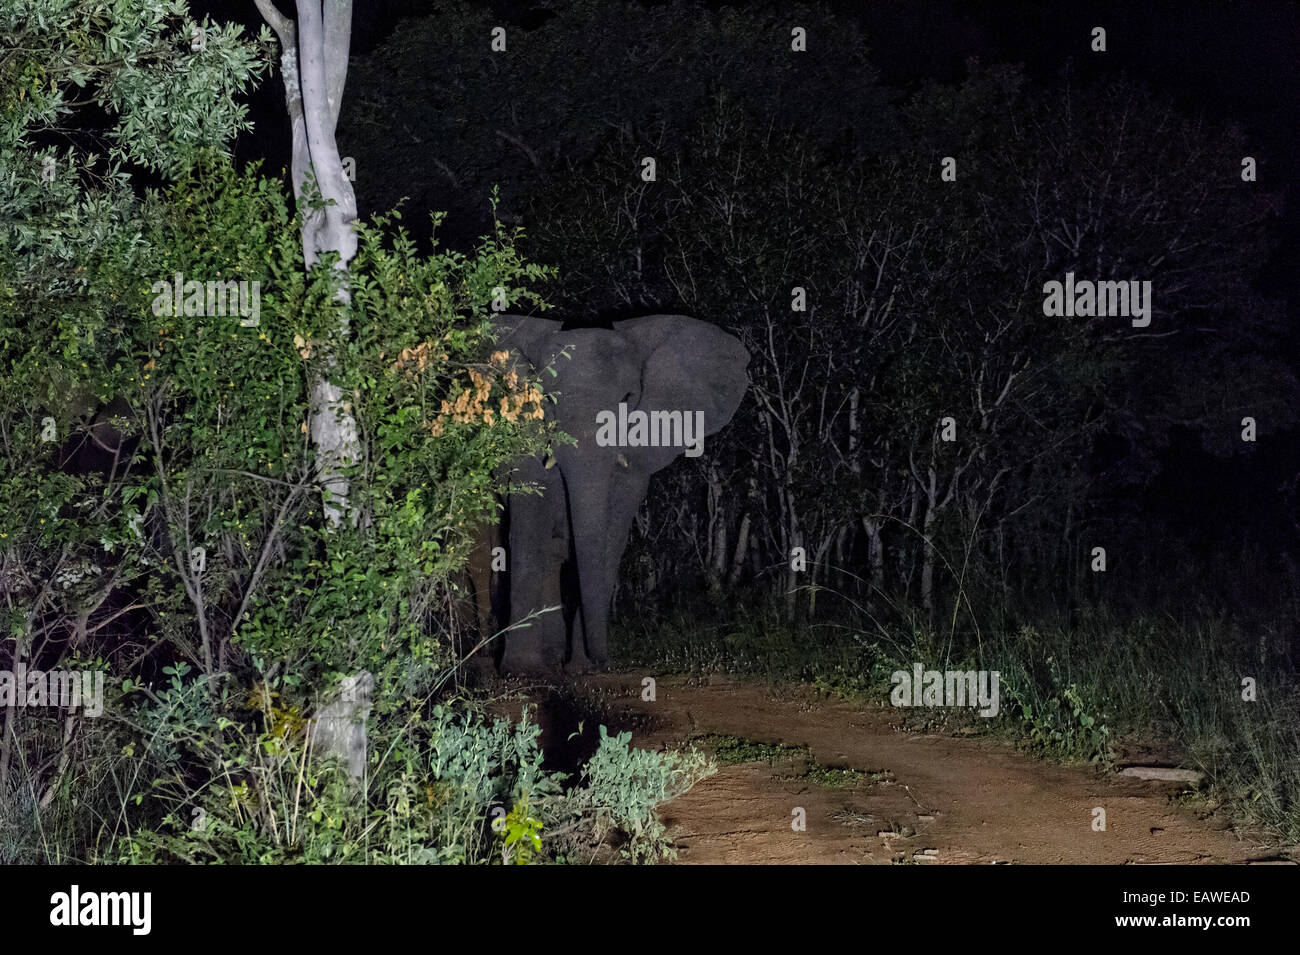 An African Elephant stands in a floodlight on a forest trail at night. Stock Photo